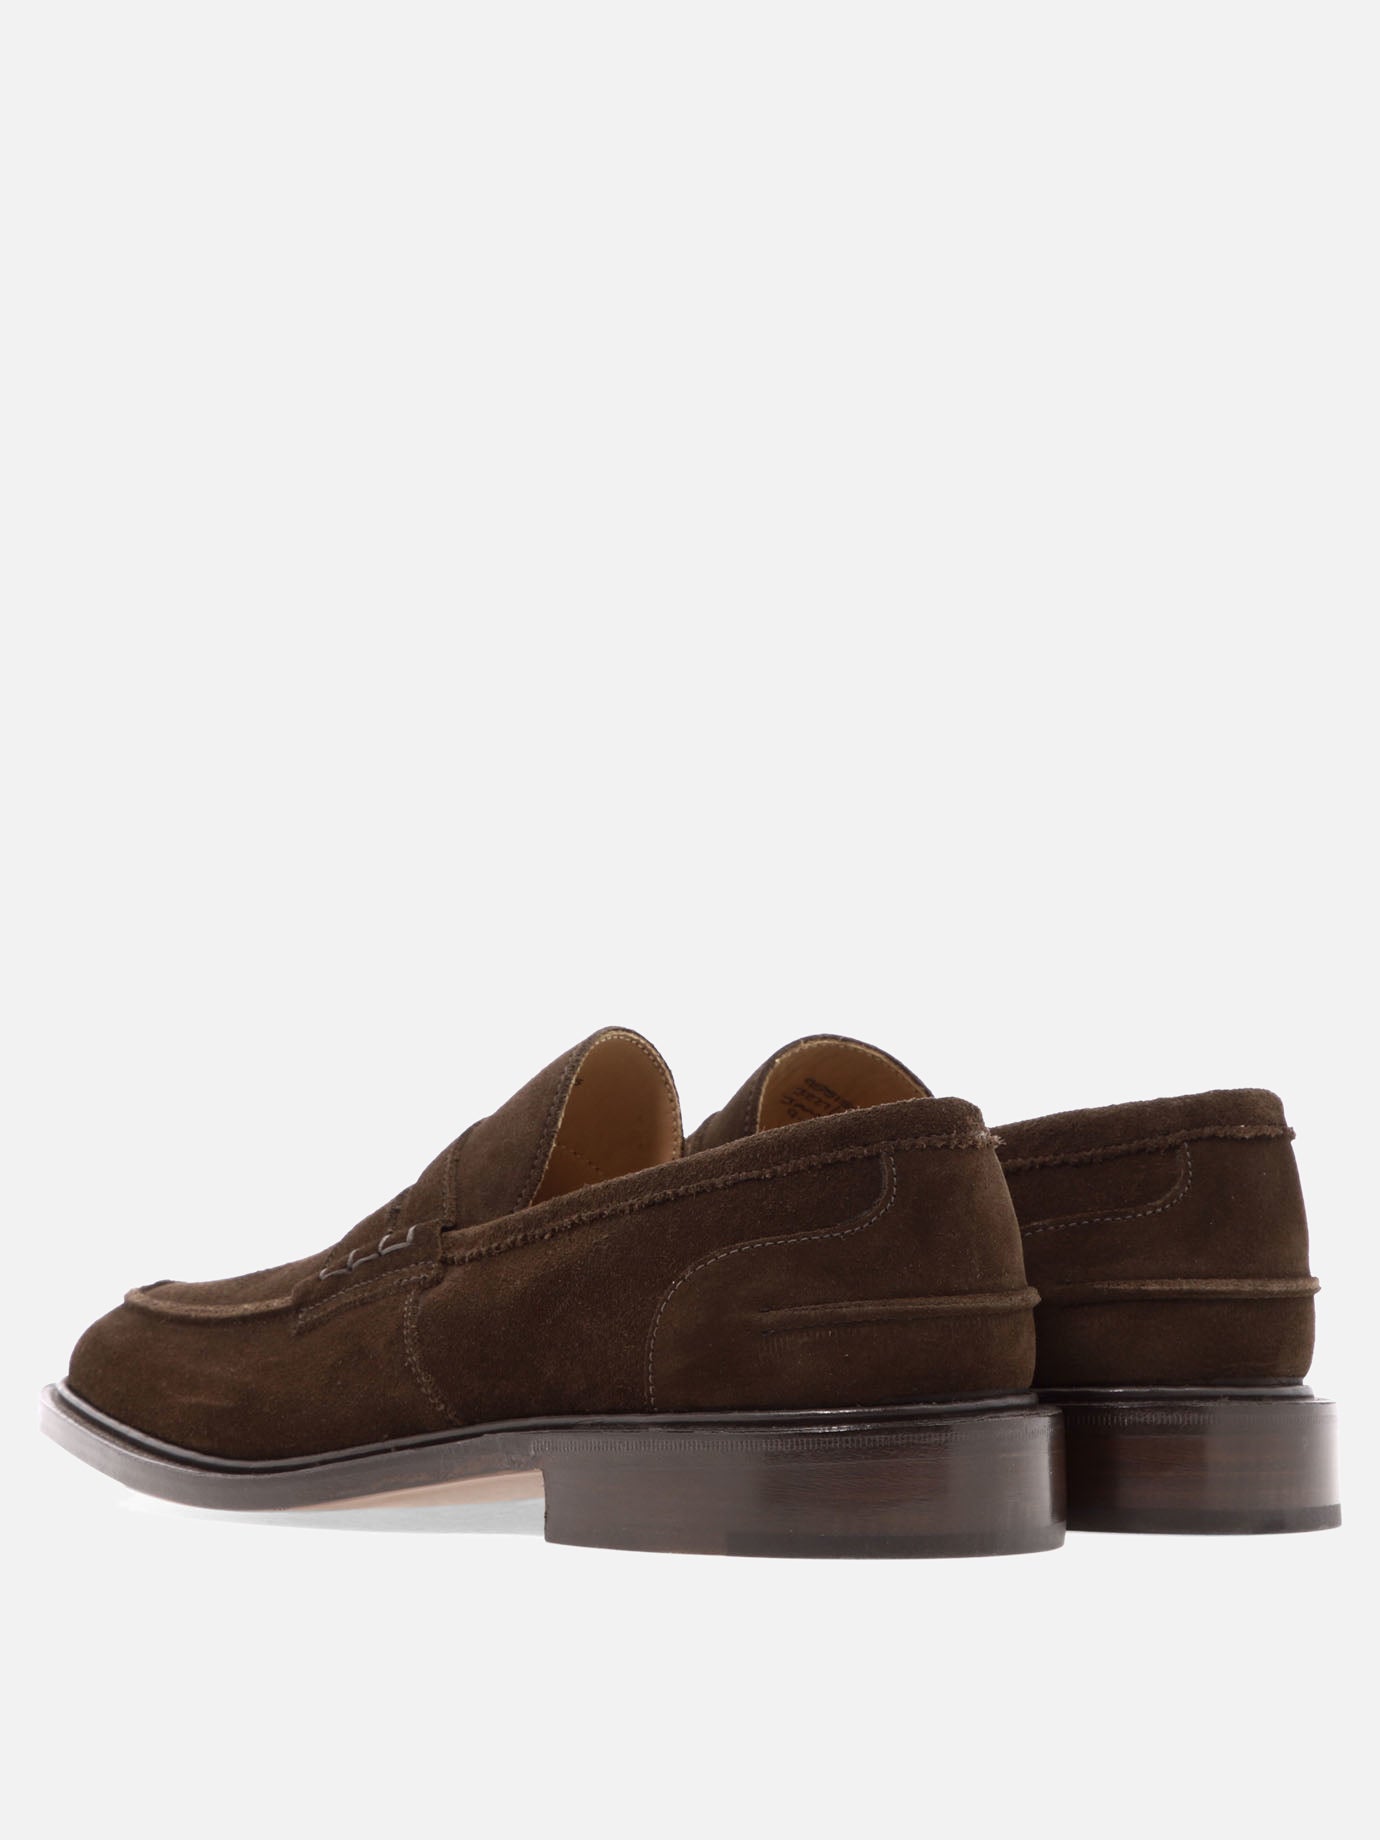 "James" loafers